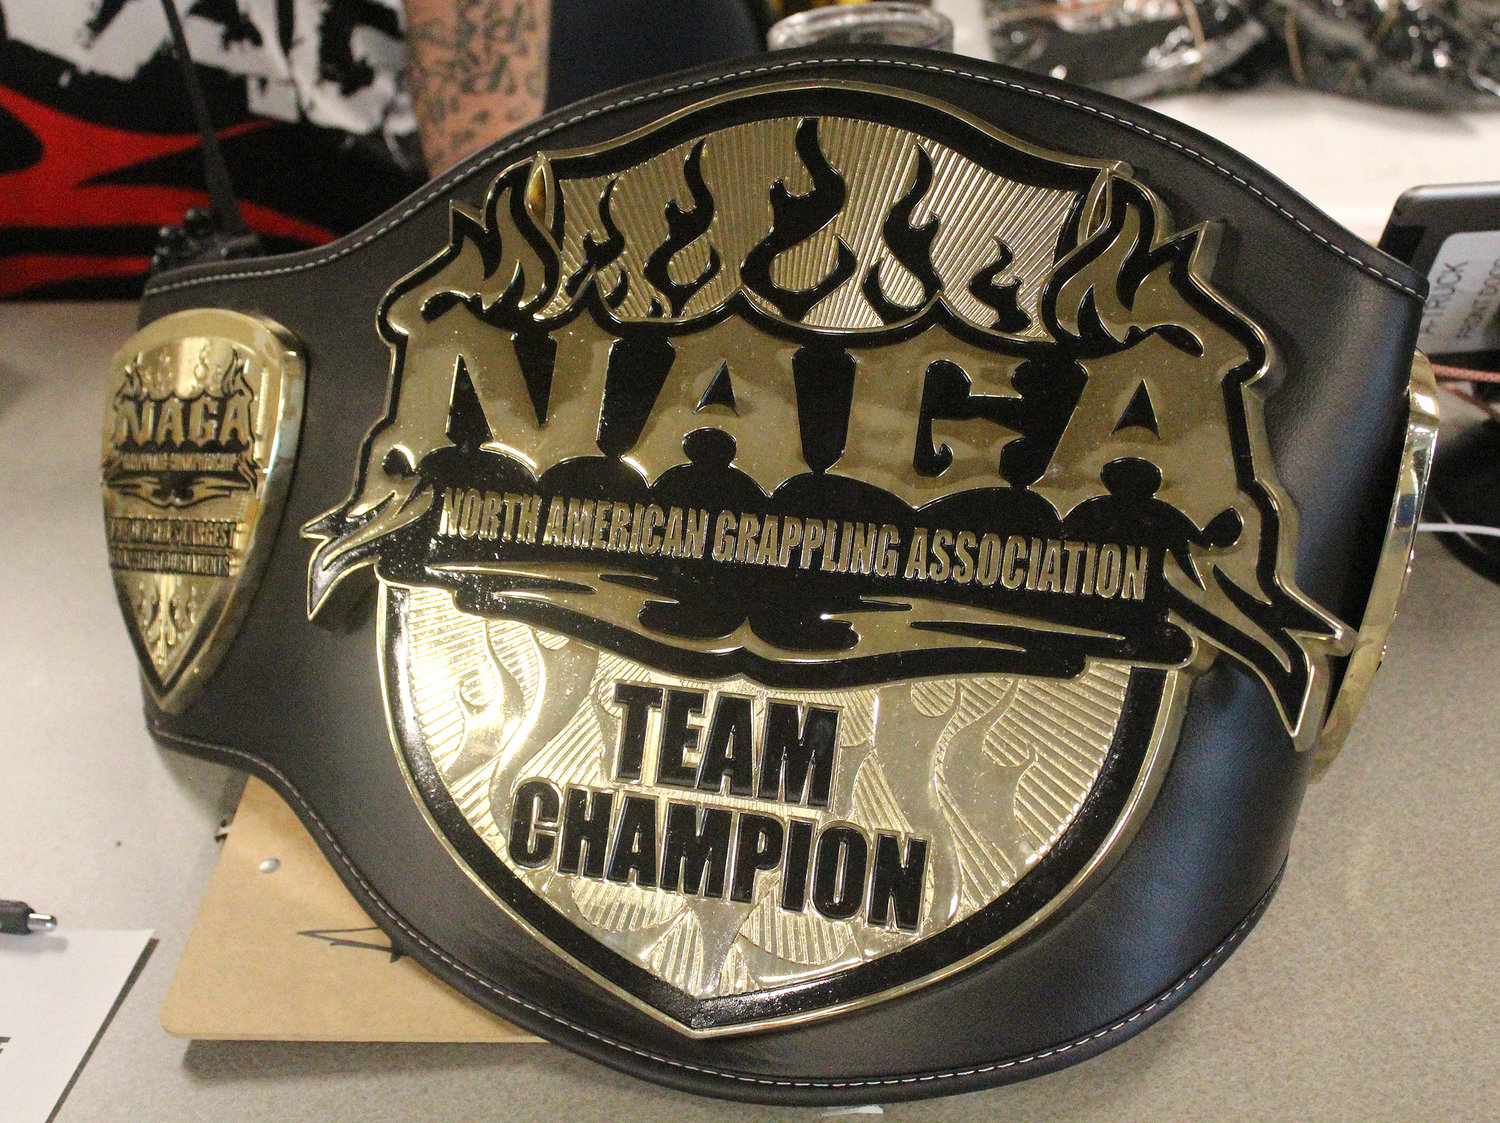 Gracie Team SE took the team title in both the overall adult and kids and teens bracket at the North American Grappling Association’s U.S. Nationals at the Foley Sports Tourism Complex Saturday, July 23.